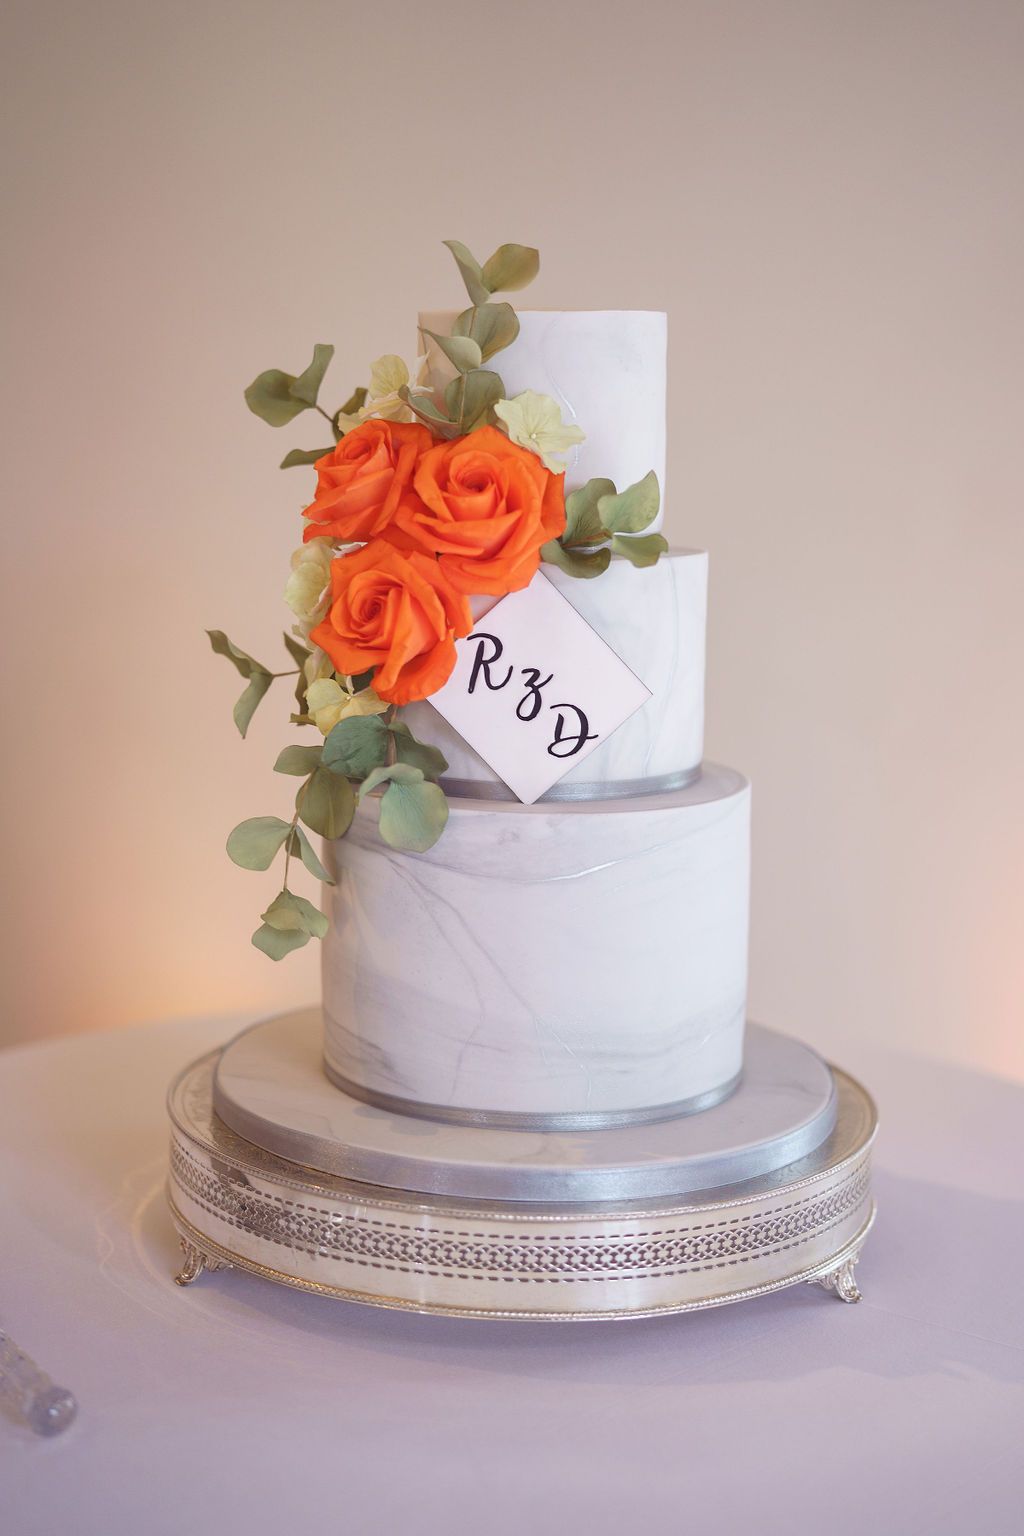 Bex and Dan white wedding cake with silver ribbon and orange fresh flowers with eucalyptus at Redhouse Barn